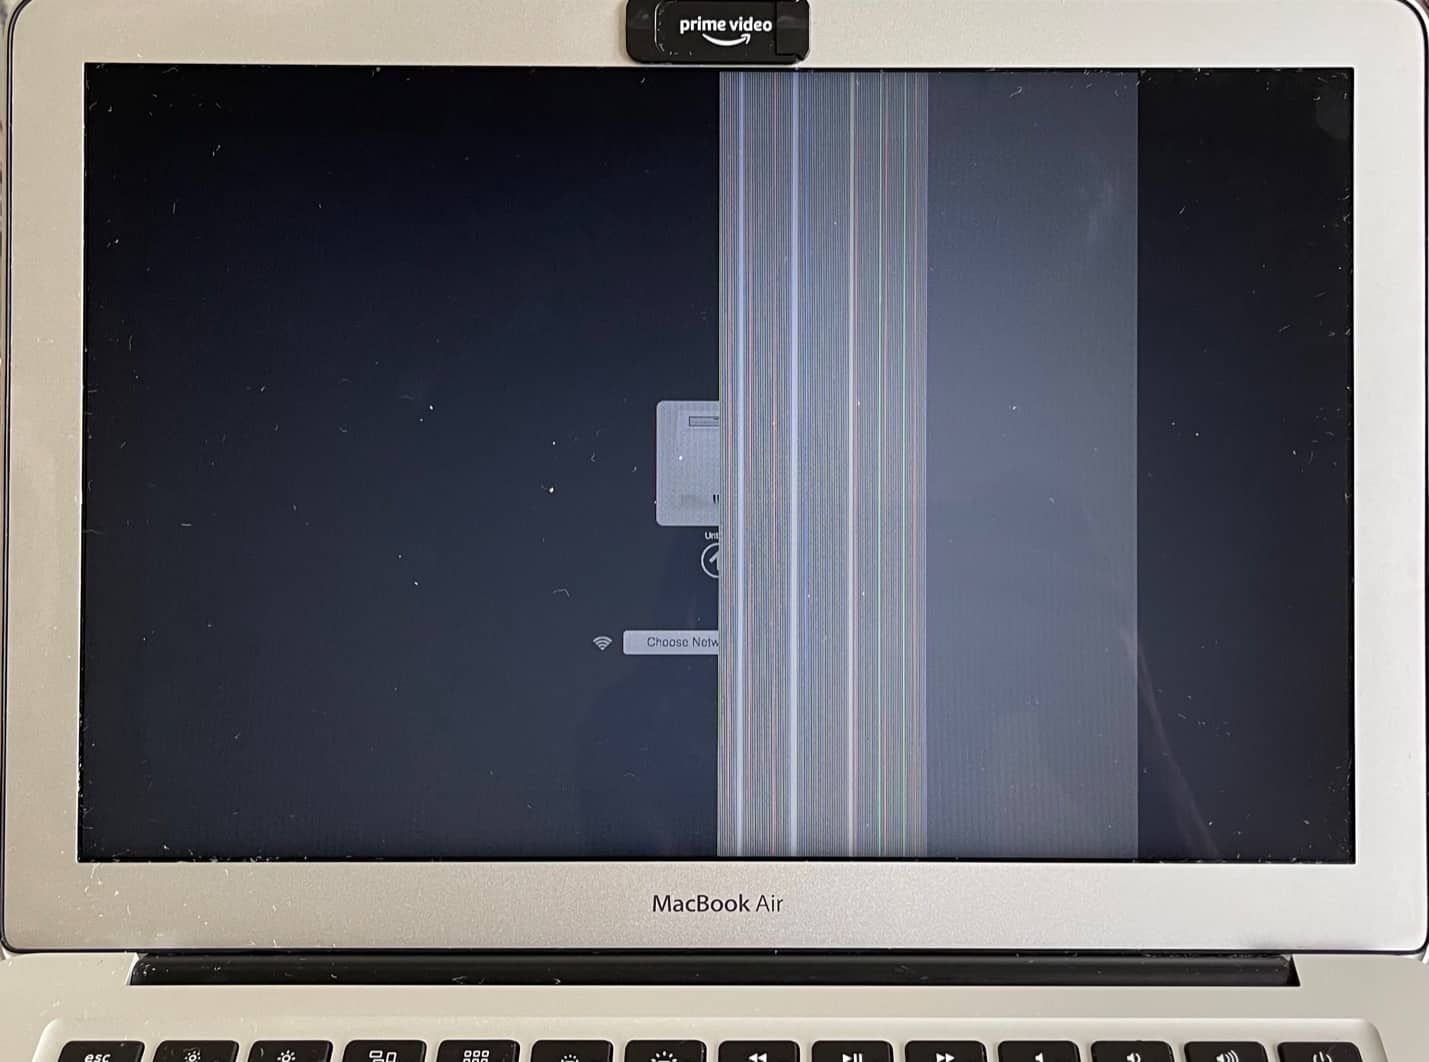 Ribbon Cable issue on MacBook Air 13 inch